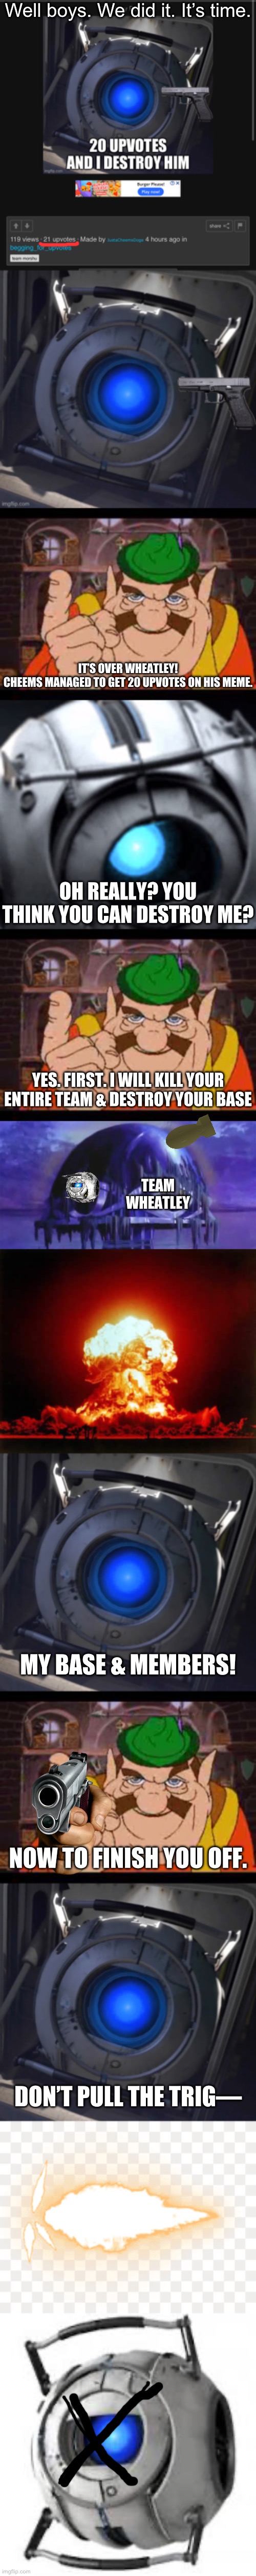 Insane Payback. | Well boys. We did it. It’s time. IT’S OVER WHEATLEY!
CHEEMS MANAGED TO GET 20 UPVOTES ON HIS MEME. OH REALLY? YOU THINK YOU CAN DESTROY ME? YES. FIRST. I WILL KILL YOUR ENTIRE TEAM & DESTROY YOUR BASE; TEAM
WHEATLEY; MY BASE & MEMBERS! NOW TO FINISH YOU OFF. DON’T PULL THE TRIG— | image tagged in team morshu | made w/ Imgflip meme maker